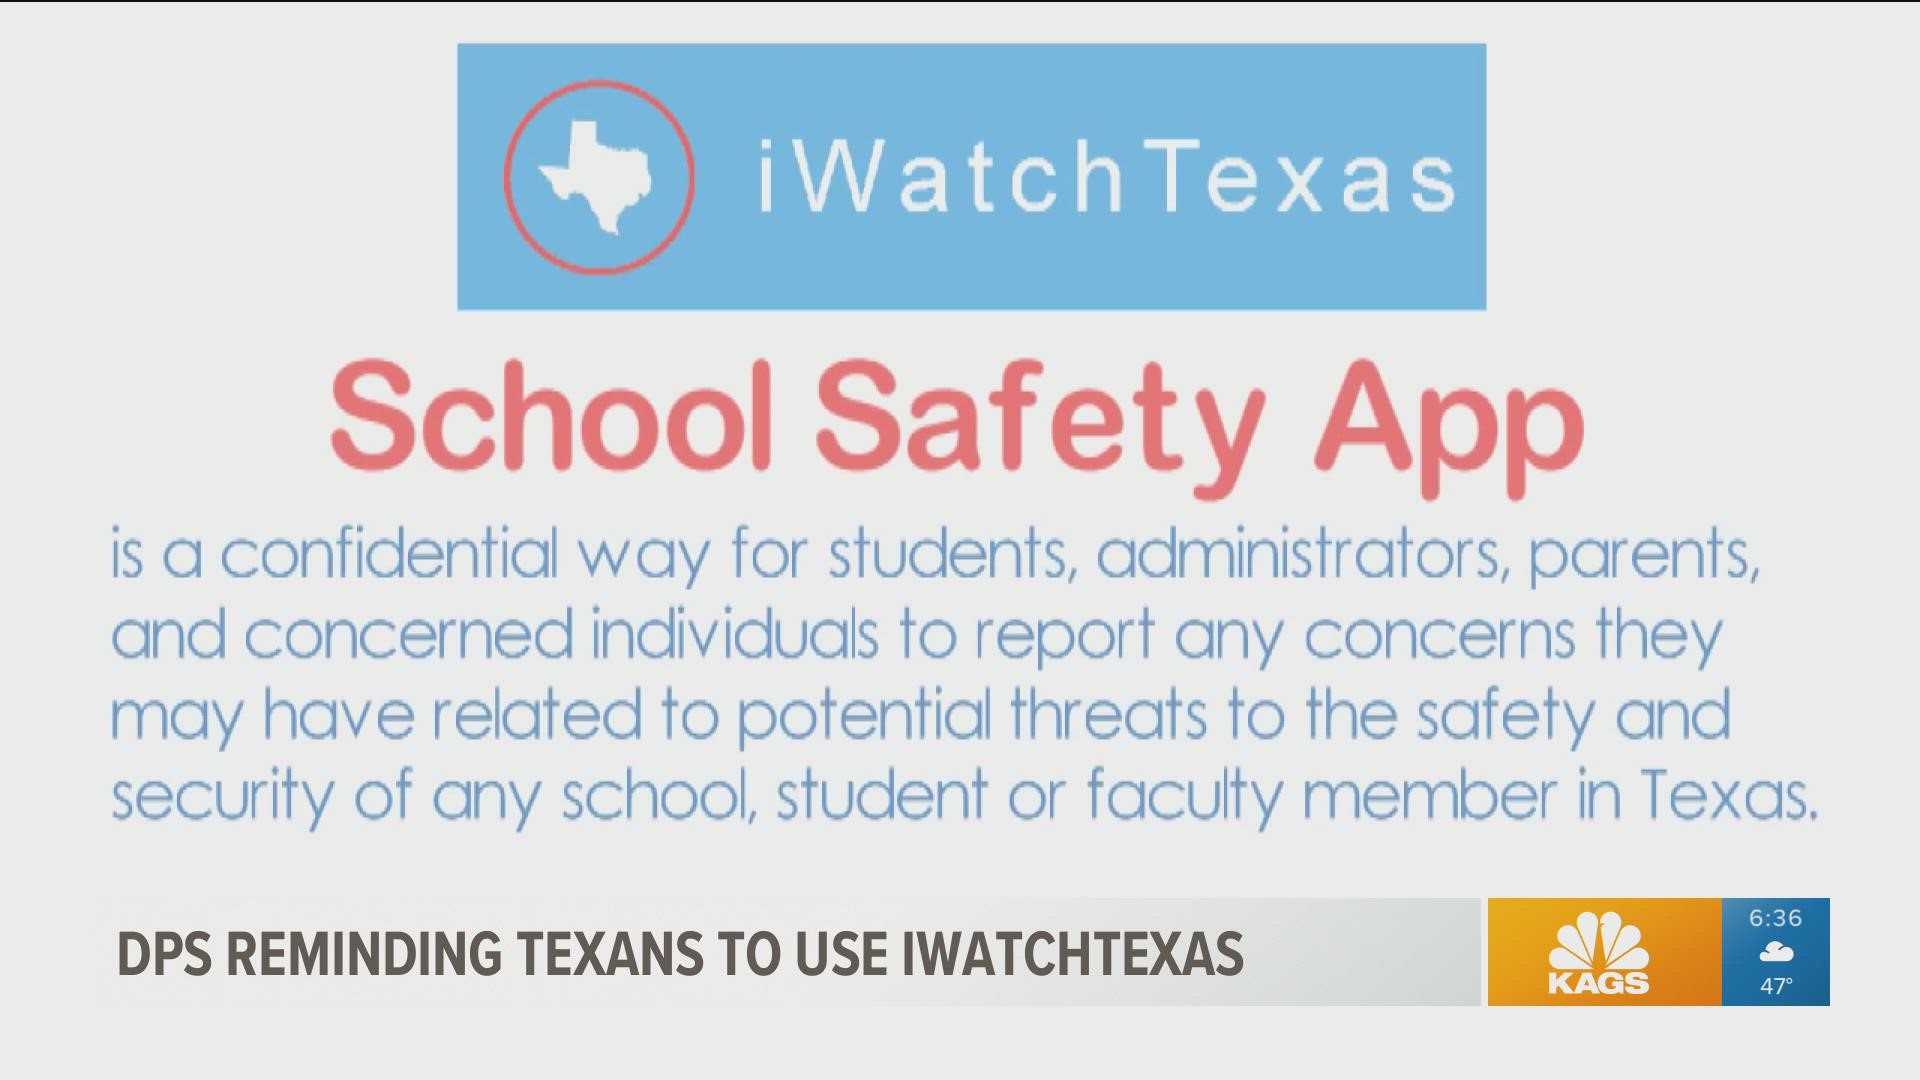 The iWatchTexas program is a partnership between communities and law enforcement and uses citizen tips on suspicious activity to thwart potential criminal acts.